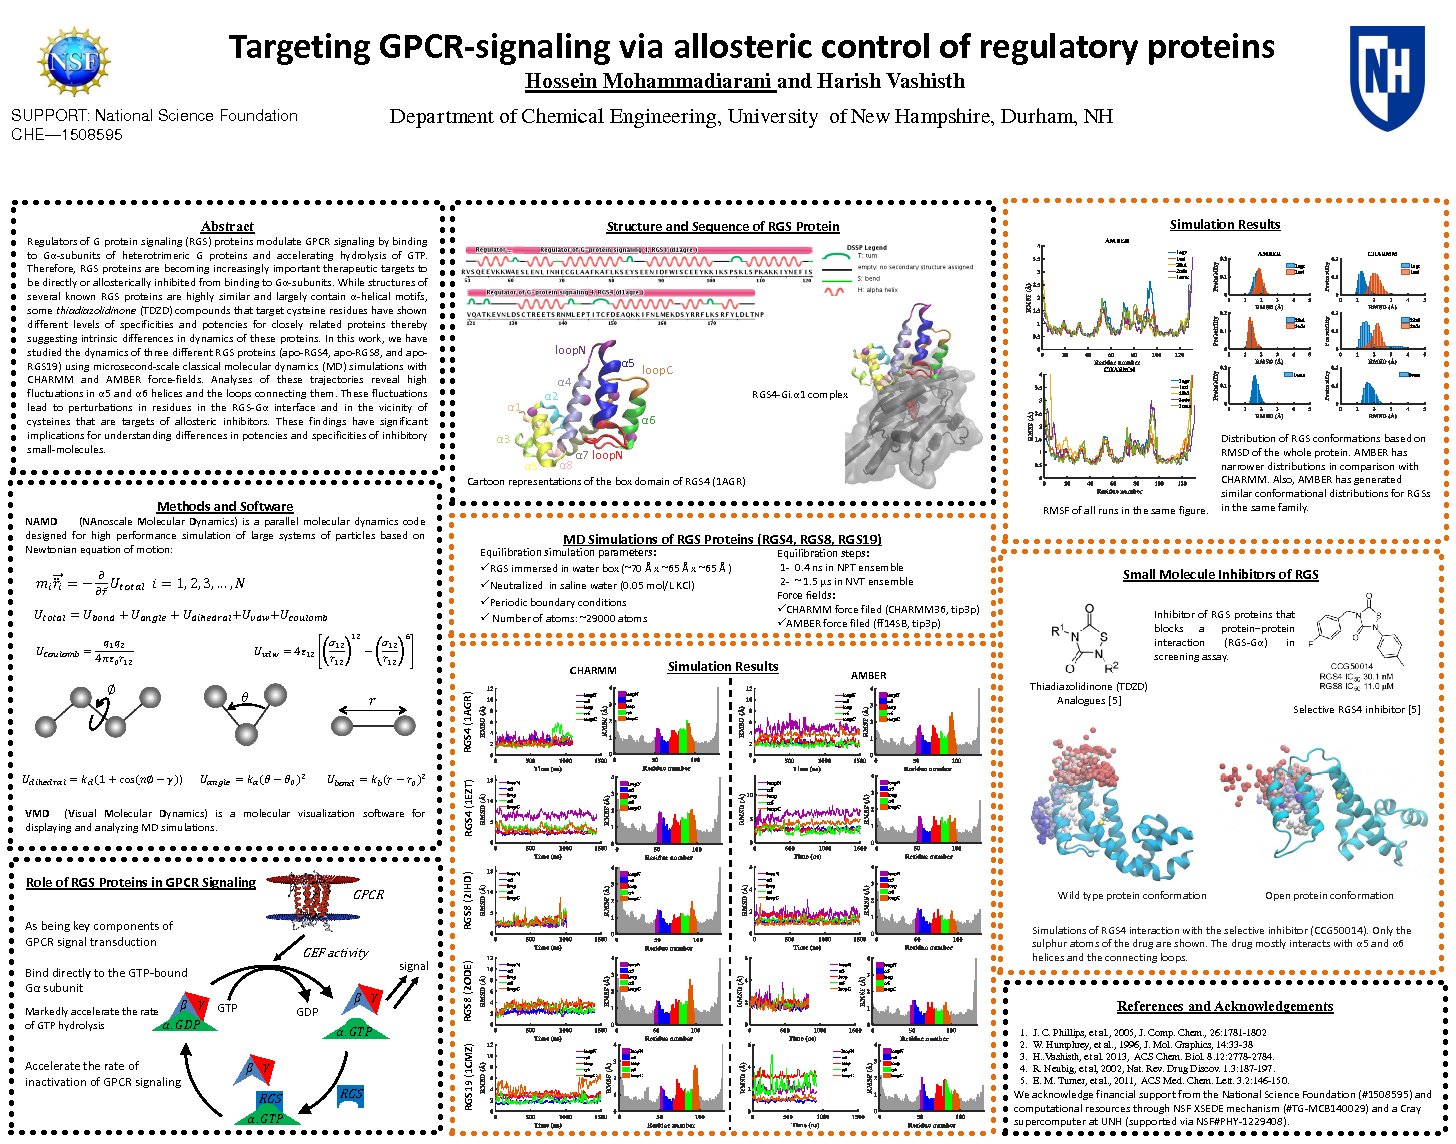 Targeting Gpcr-Signaling Via Allosteric Control Of Regulatory Proteins by hm2006